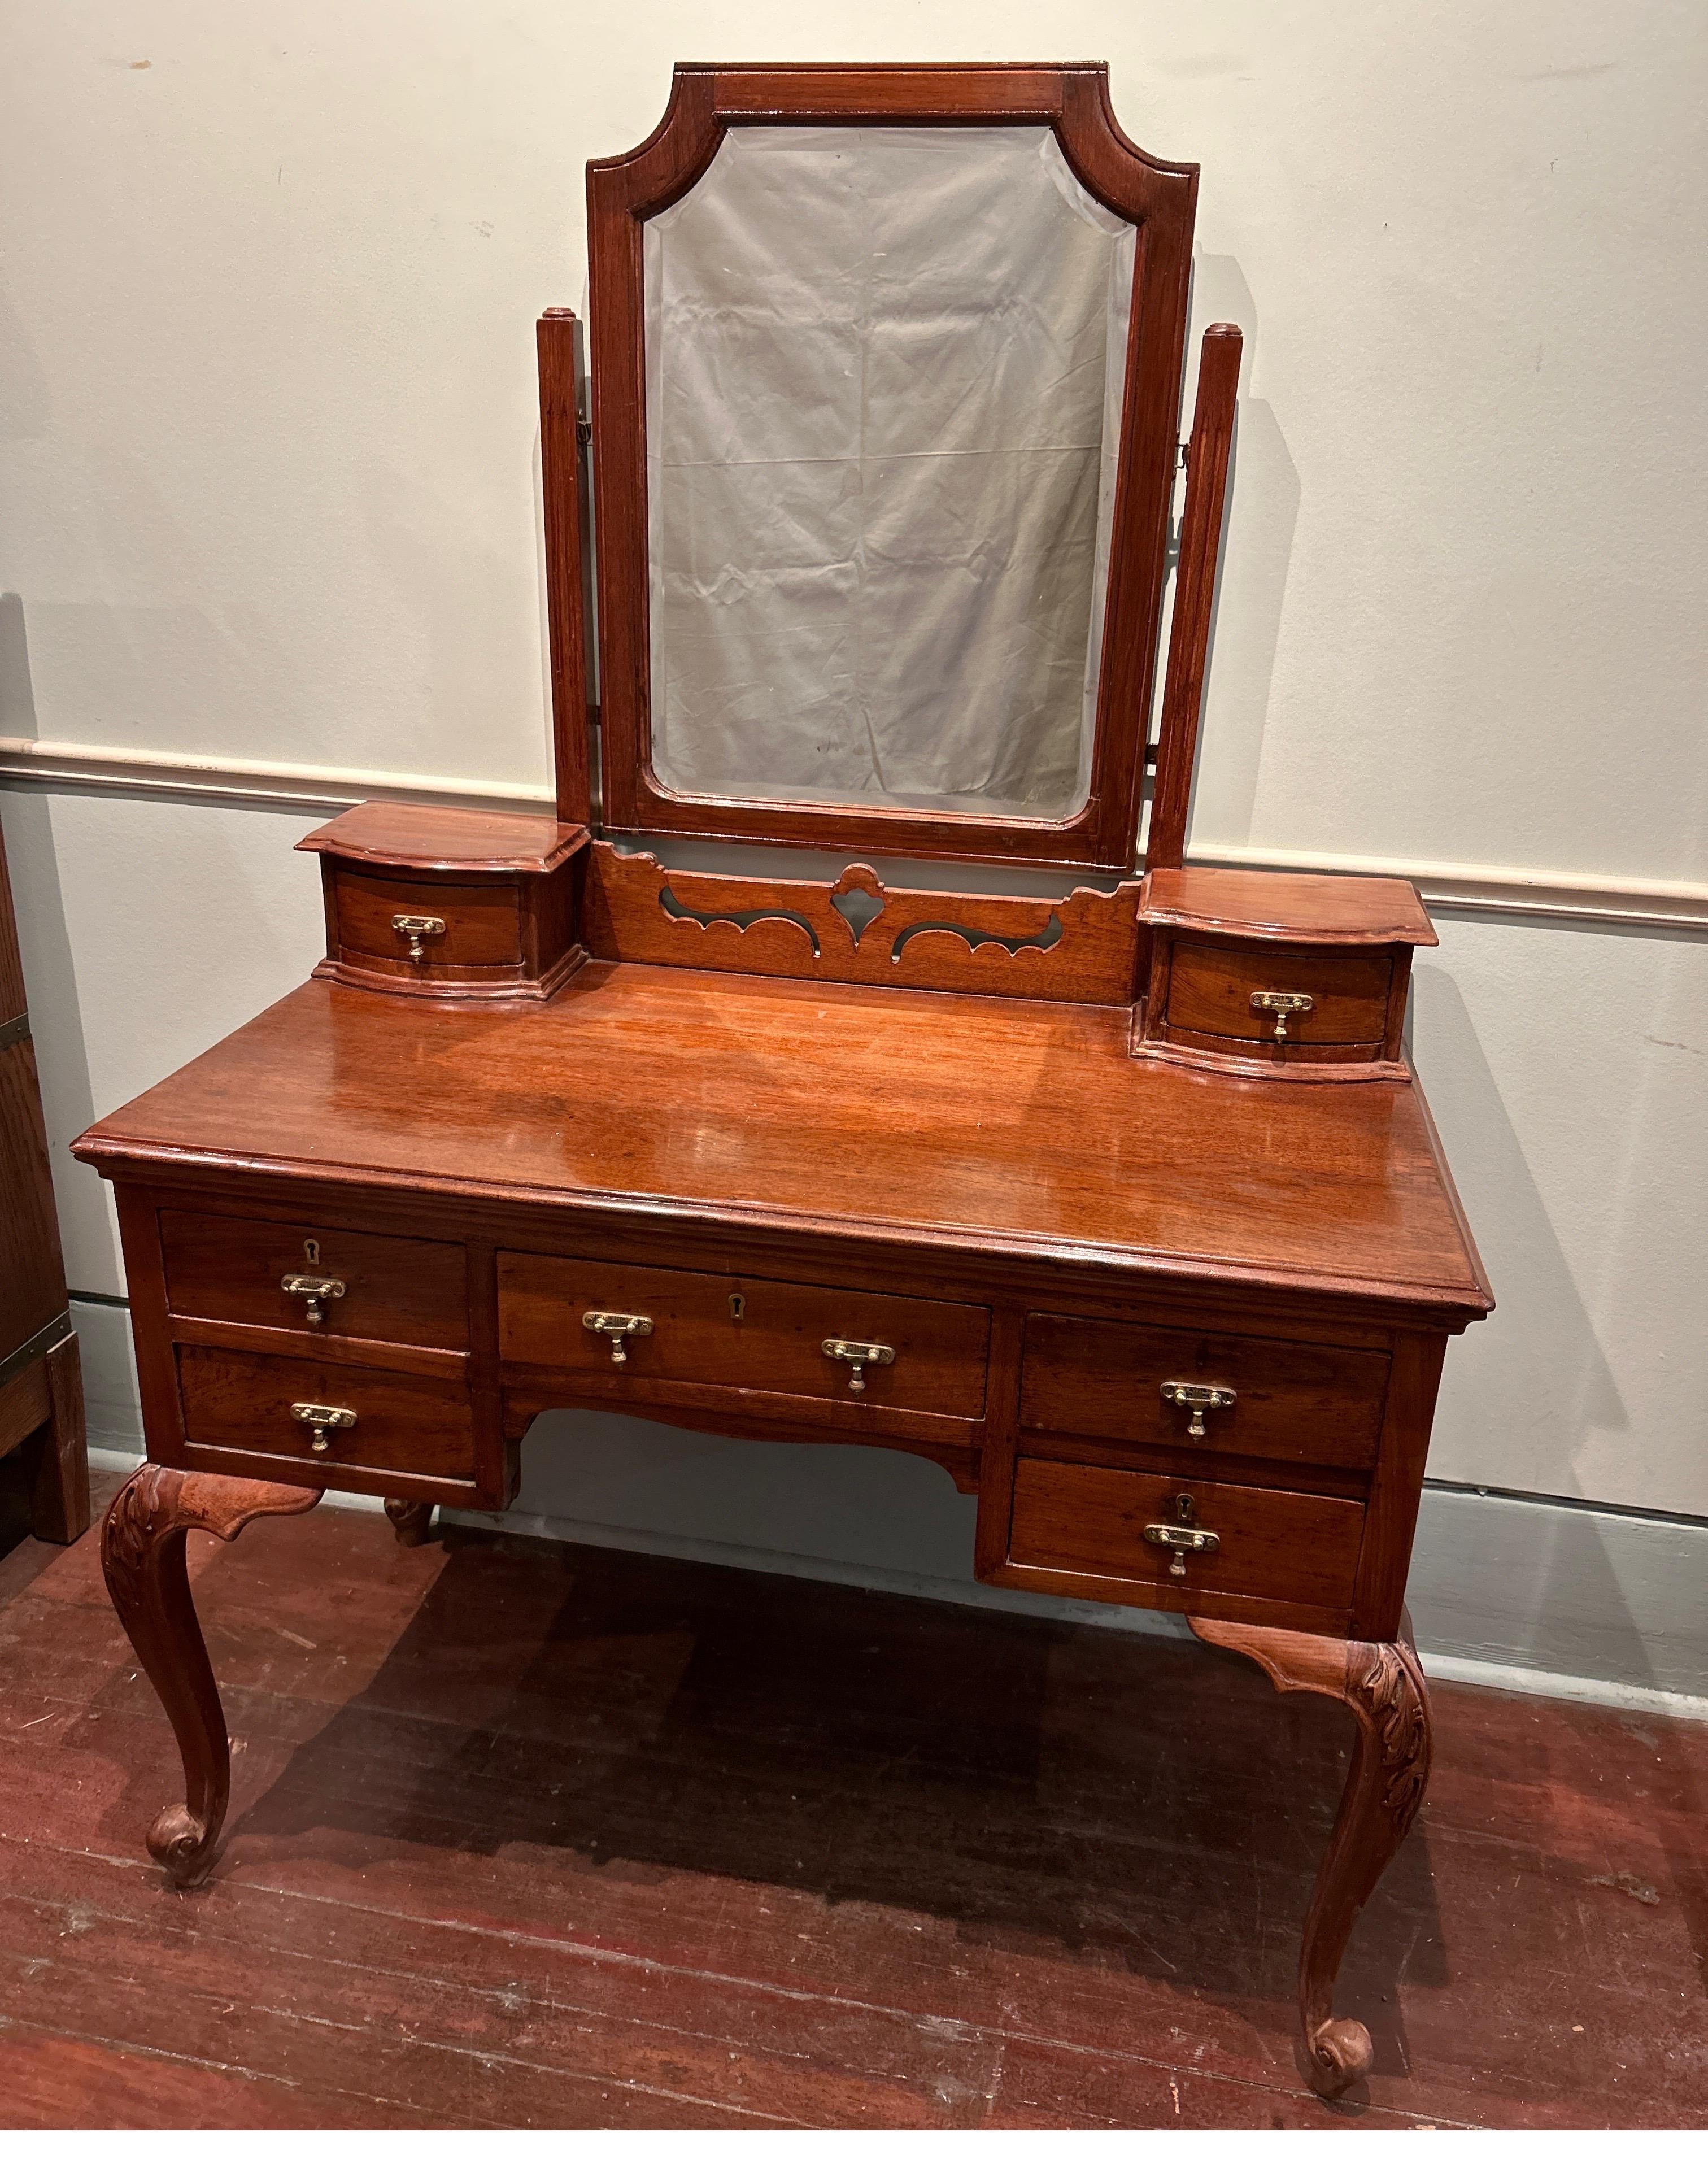 A vanity straight out the British Raj in Art Nouveau fashion. Solidly constructed from teak wood with hand carved scrolling legs and original bevel mirror and brass hardware. Nice panel work on the sides . Seven drawers make it very functional. A